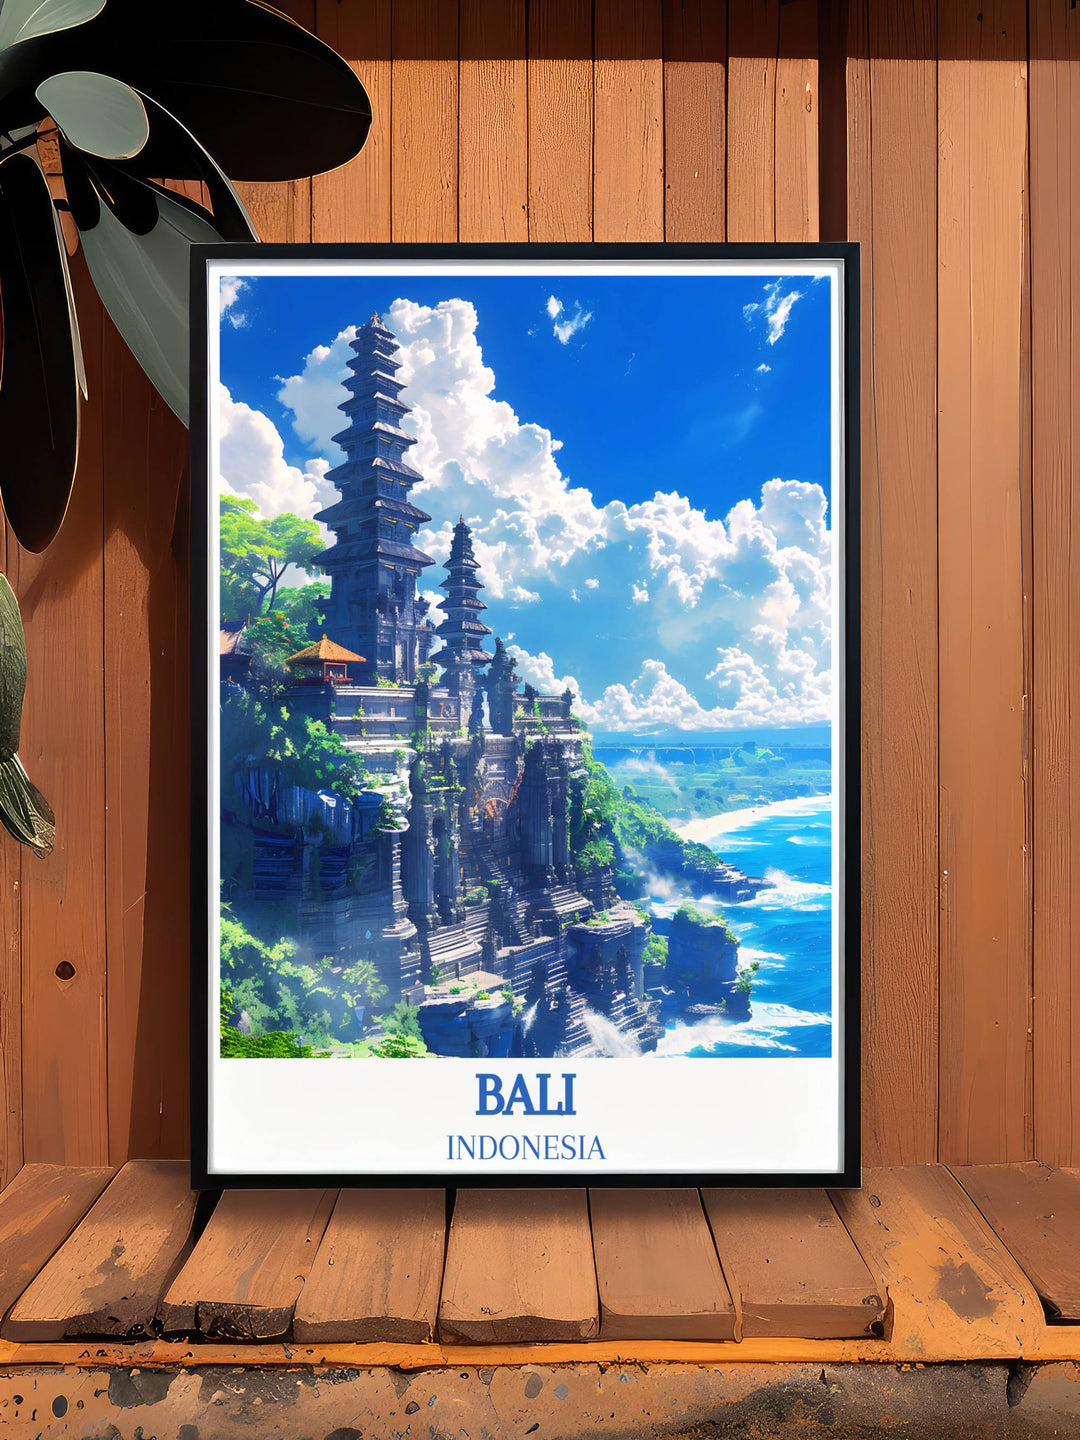 Bali art print featuring the iconic Tanah Lot Temple, an excellent gift for those who appreciate architectural beauty and Indonesian culture.